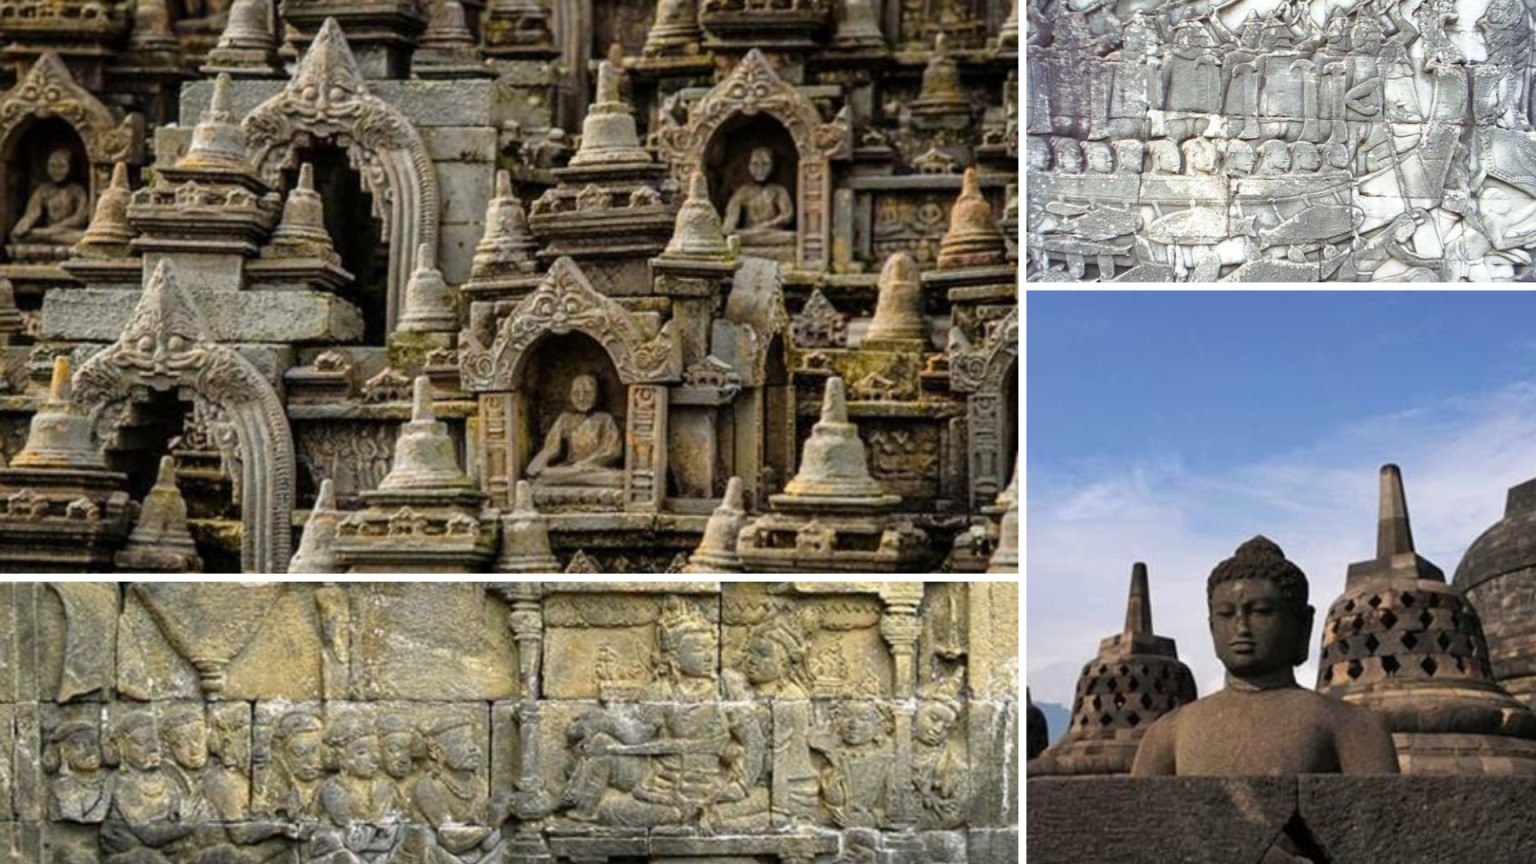 One of the Greatest Monuments in the World but Who Built it? The Strange Origins of Borobudur and the Lost World of Cham